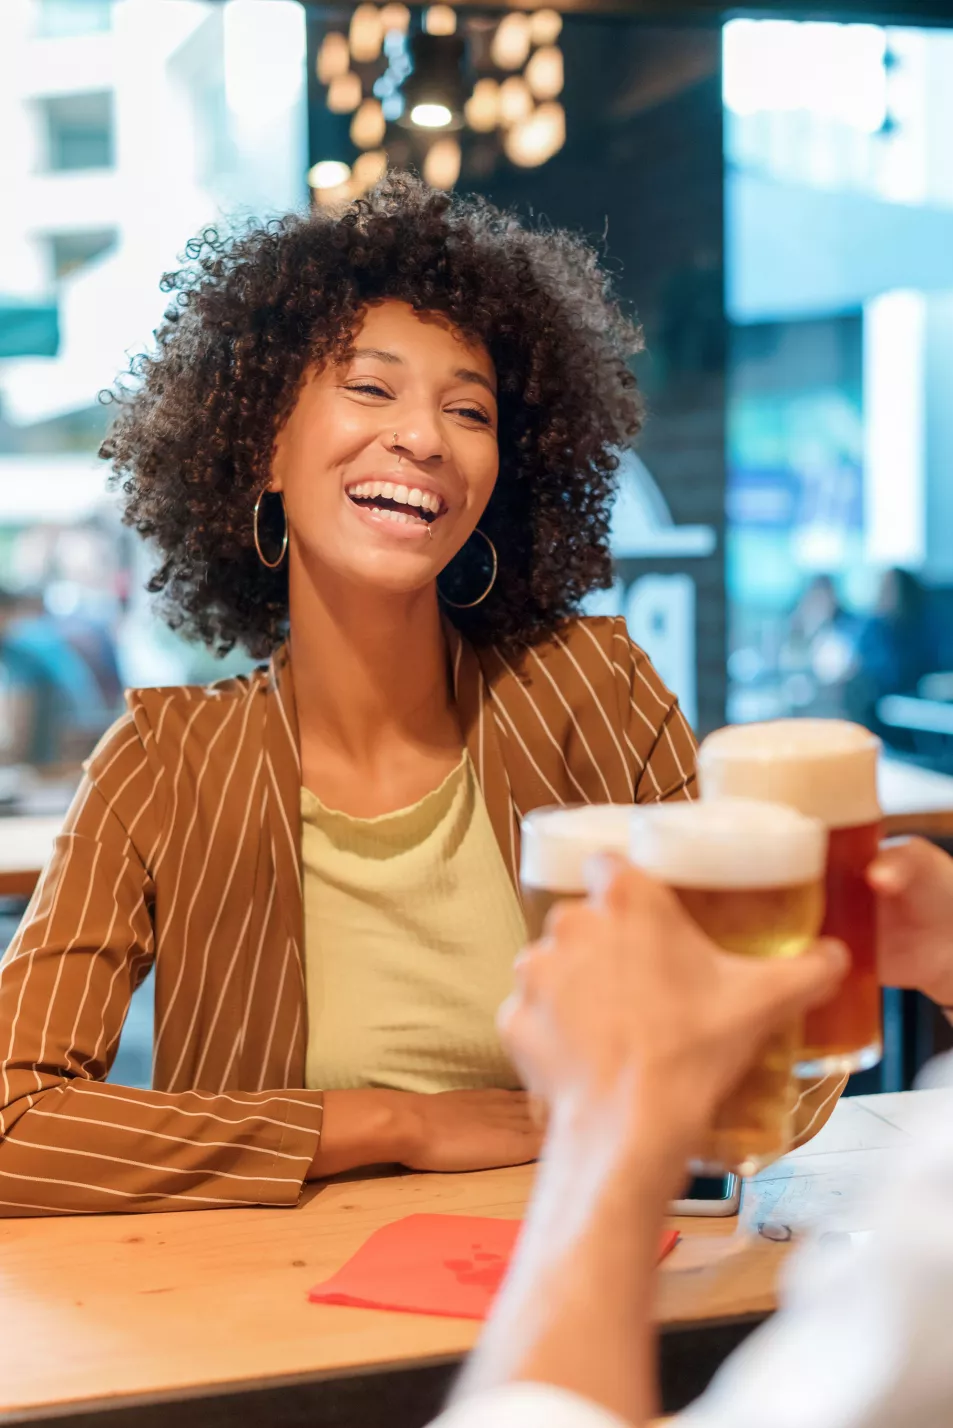 Woman toasting friends with beer